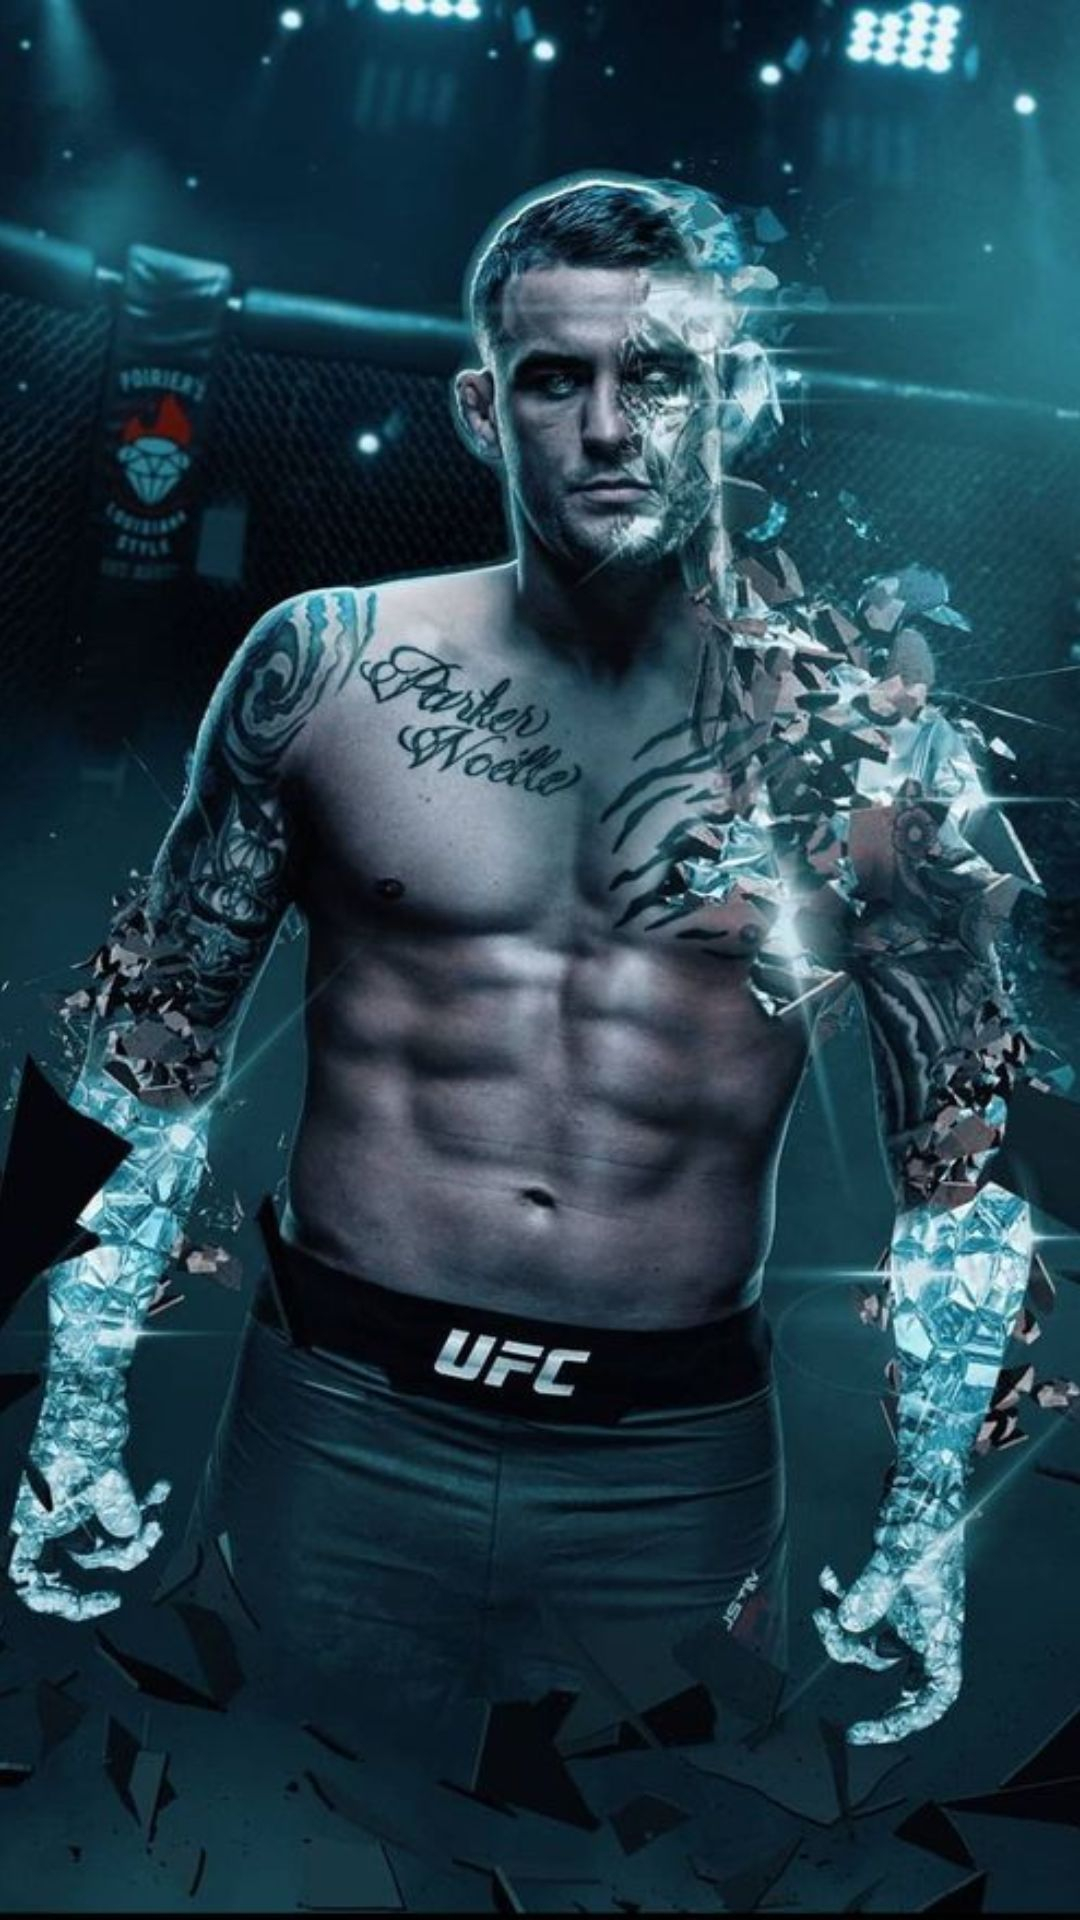 1080x1920 UFC Wallpapers Download HD And 4k UFC Wallpapers